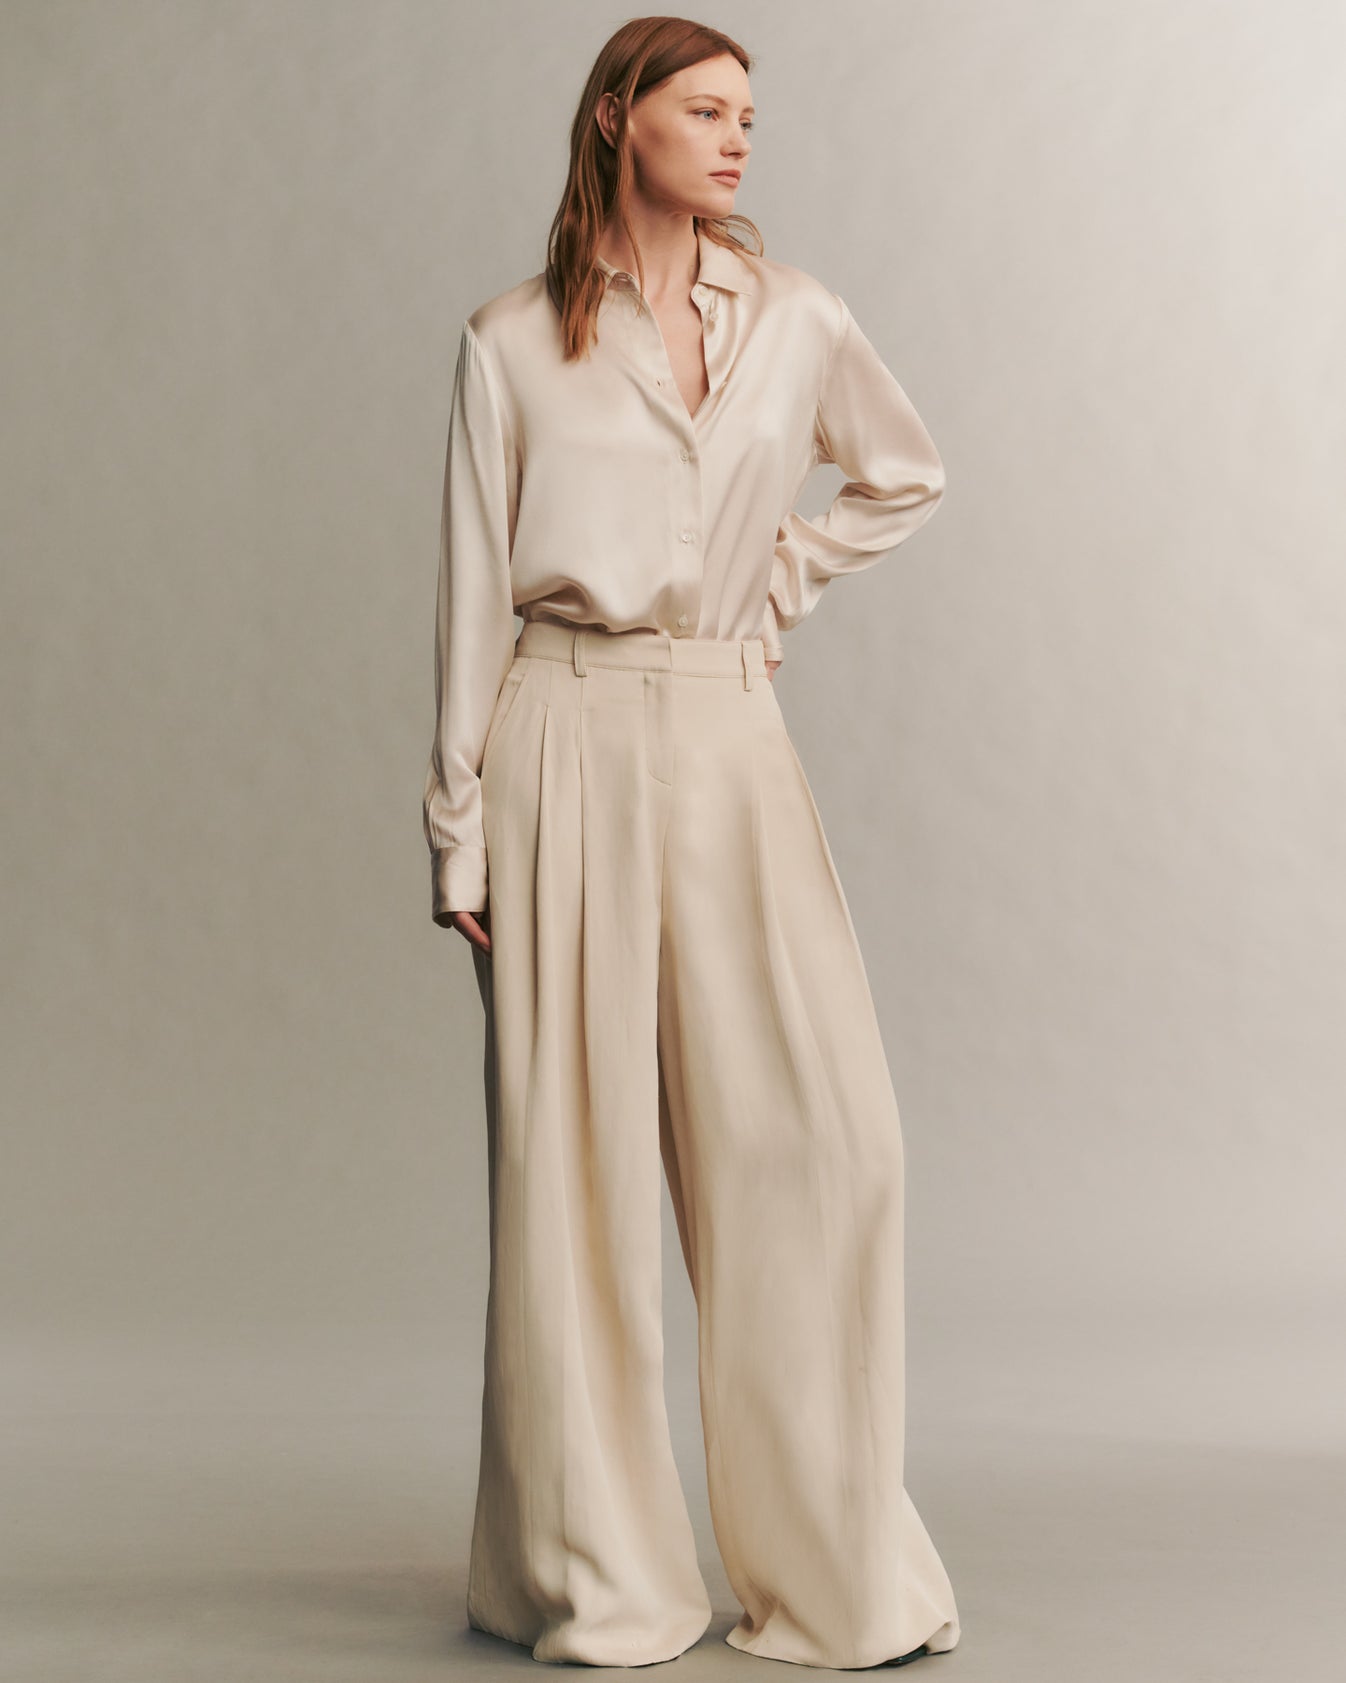 TWP French oak Didi Pant in Coated Viscose Linen view 3